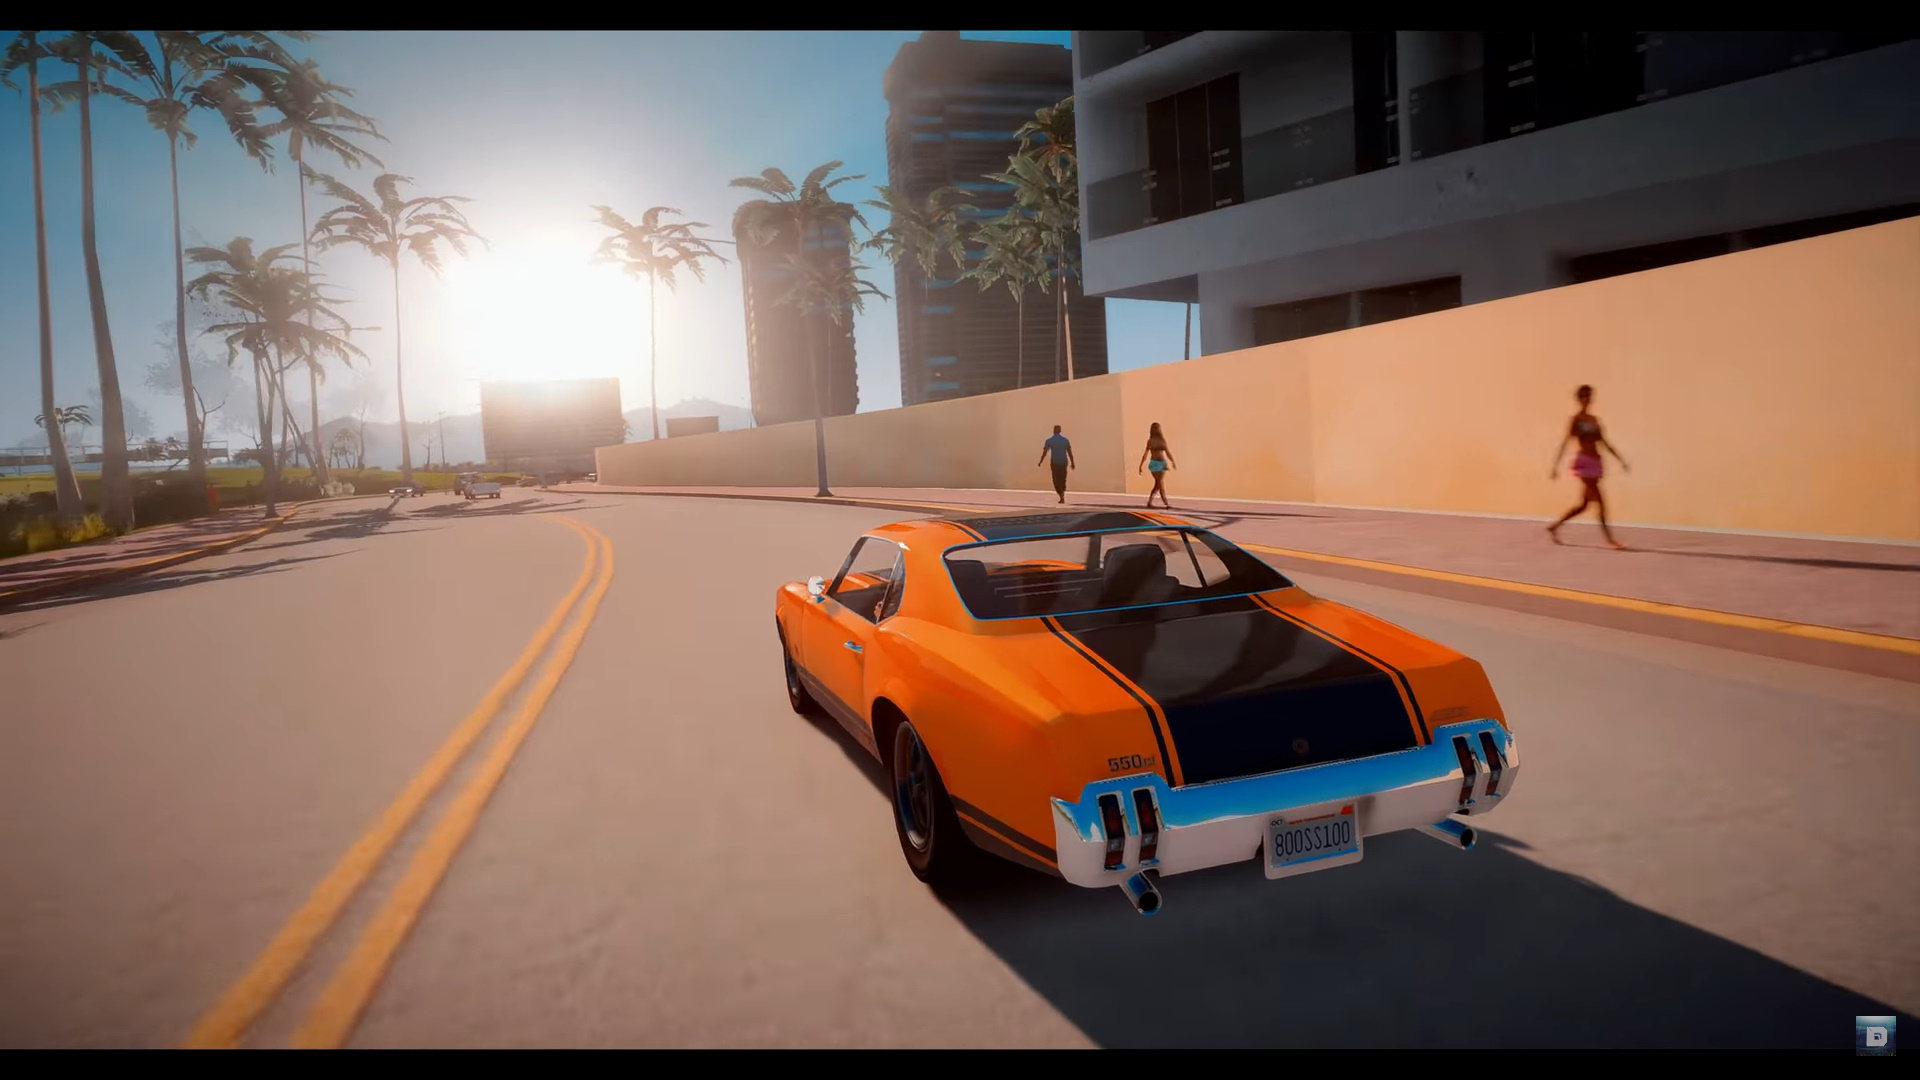 Vice City Looks Terrific With These Gta 5 Mods | Pcgamesn